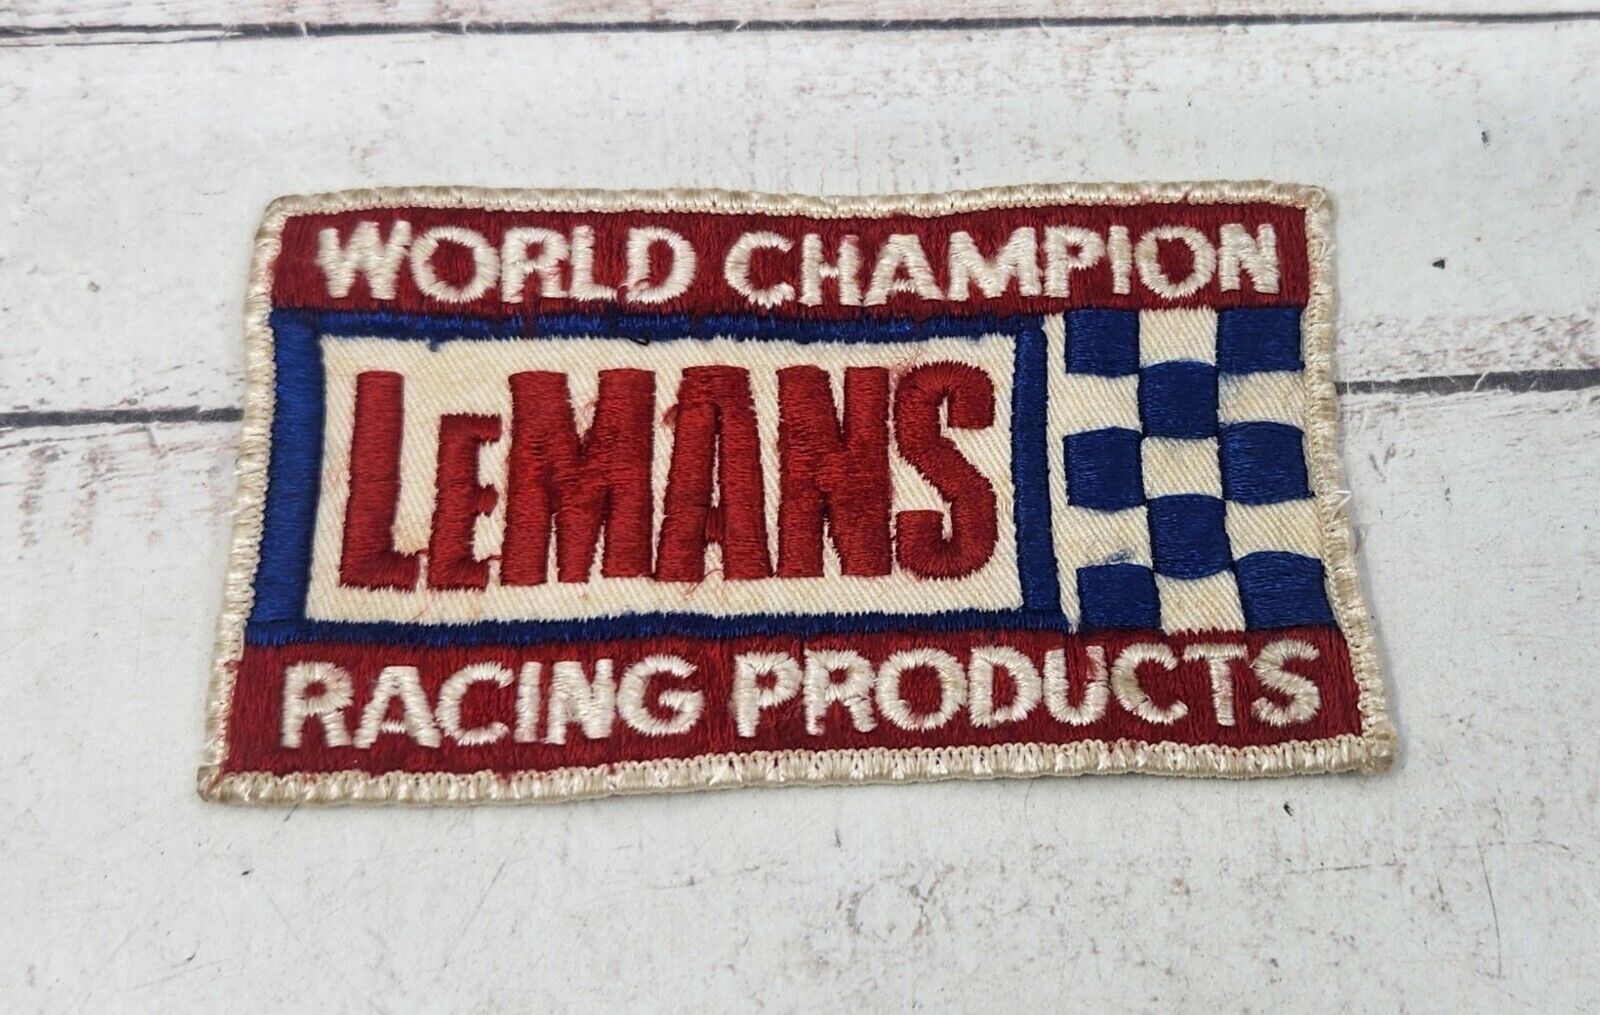 1970s Vintage LeMans Racing Products Embroidered Patch World Champion